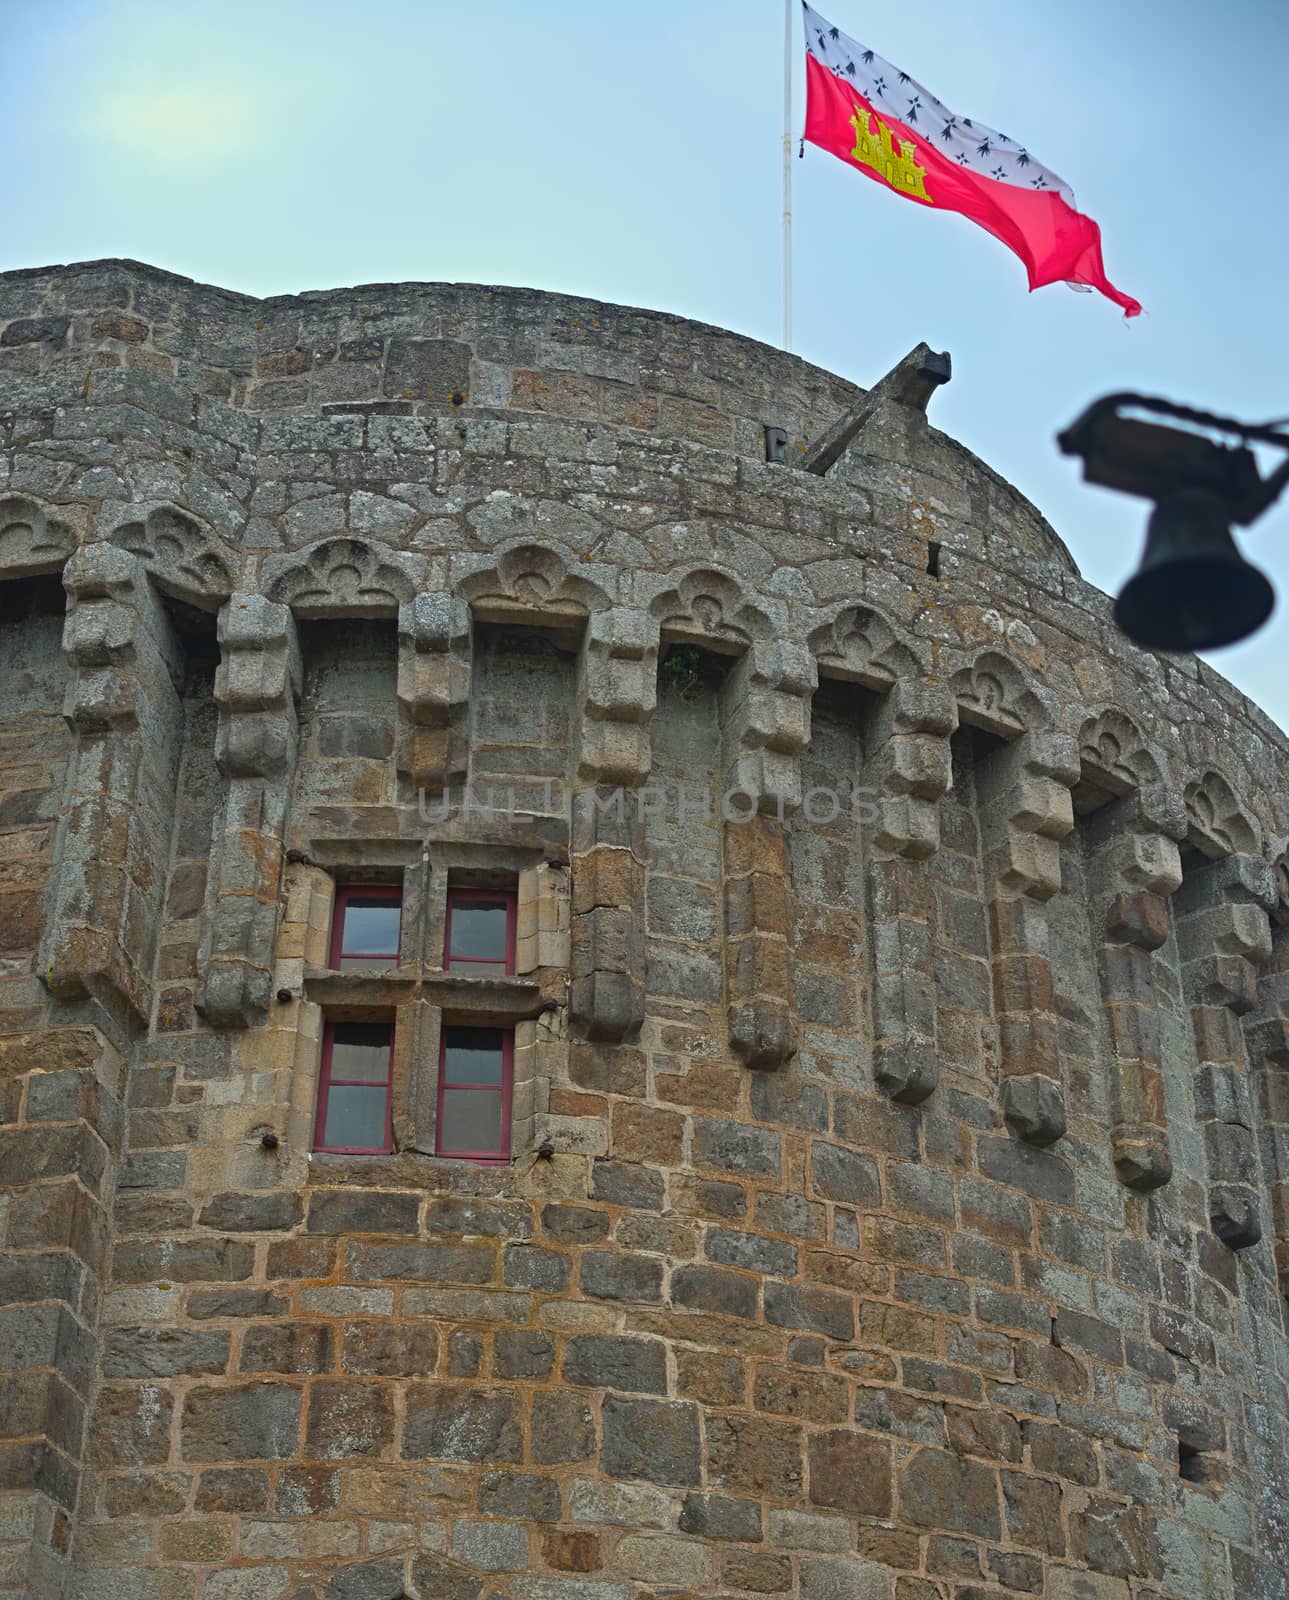 Big central stone tower with flag on top at Dinan fortress, France